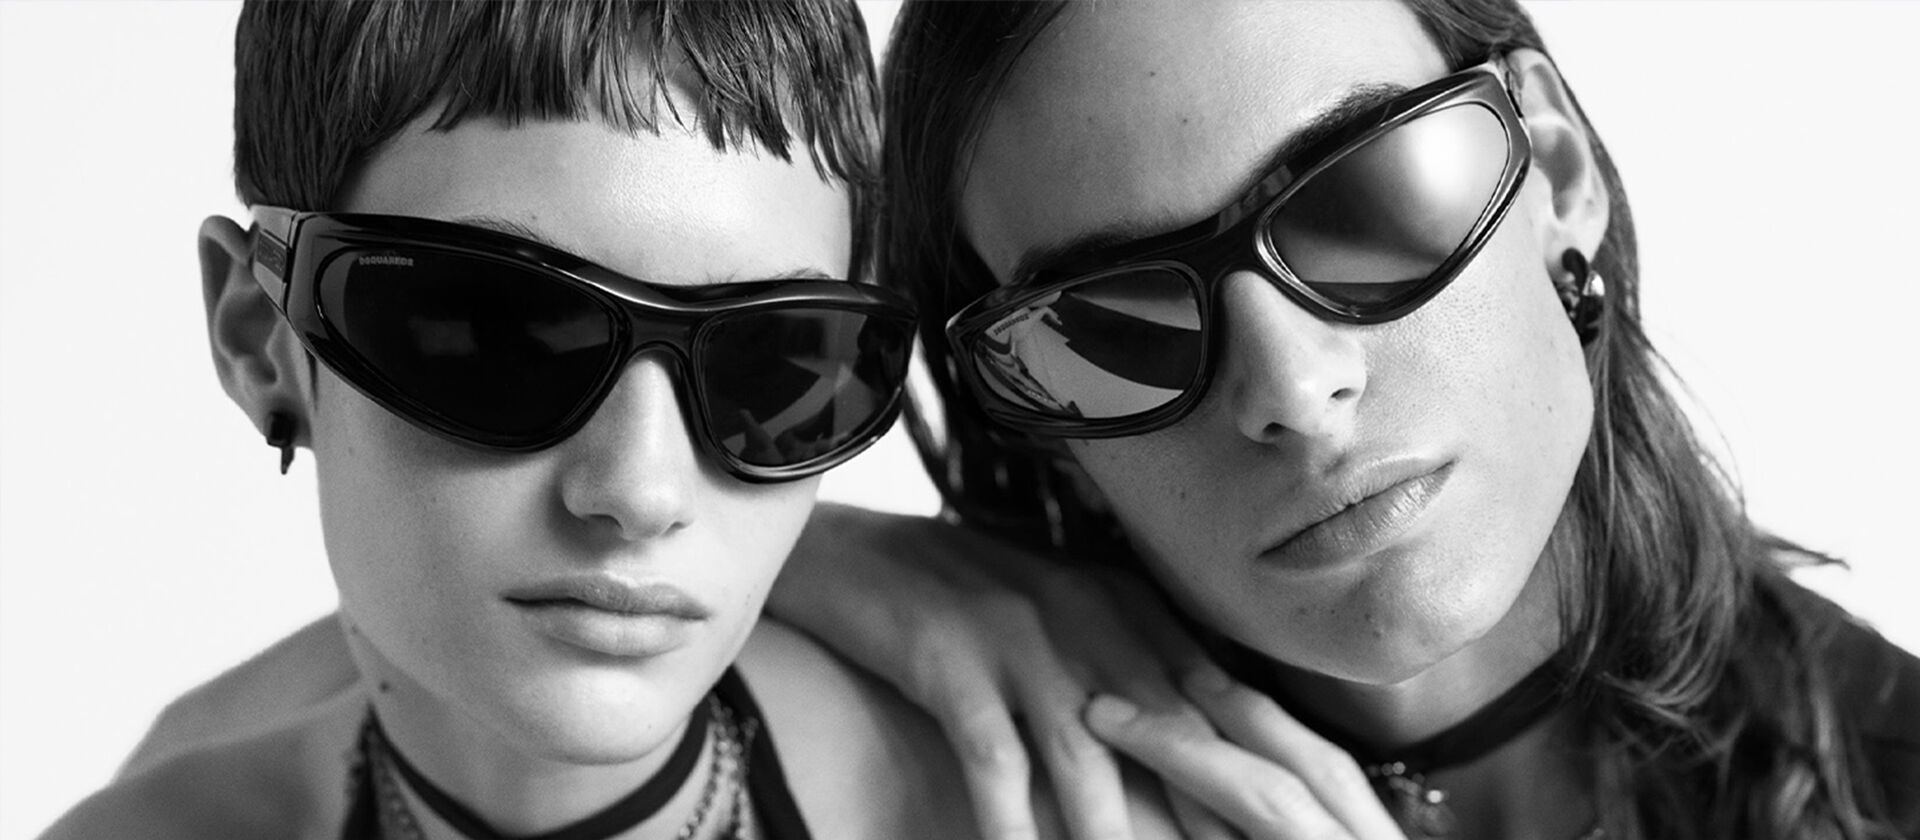 man & woman with black sunglasses on black and white background